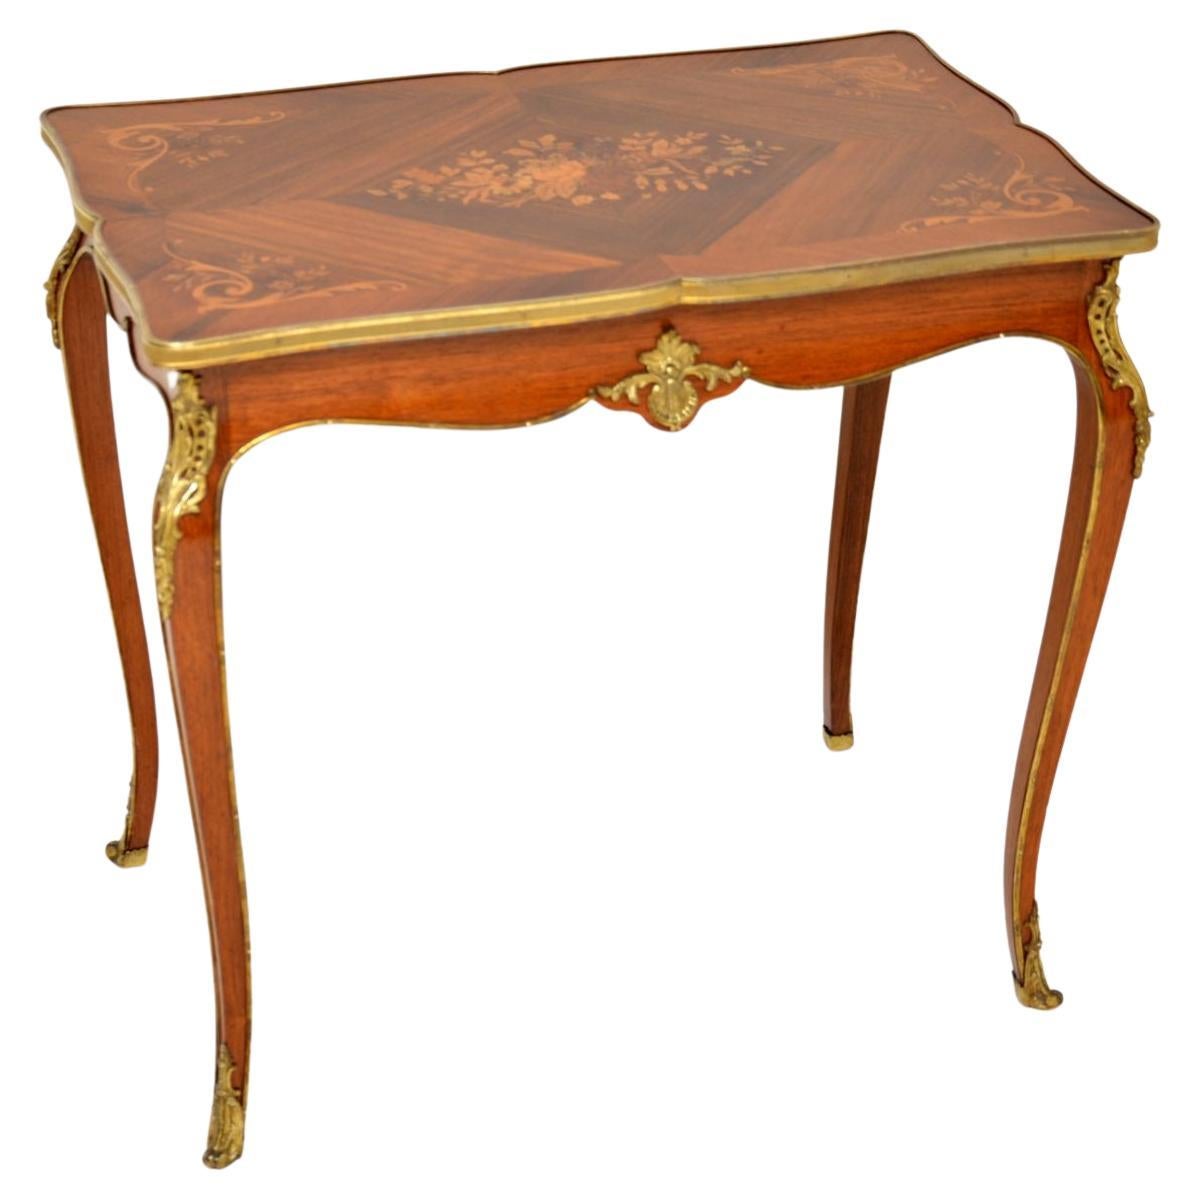 Antique French Inlaid Writing Table / Desk